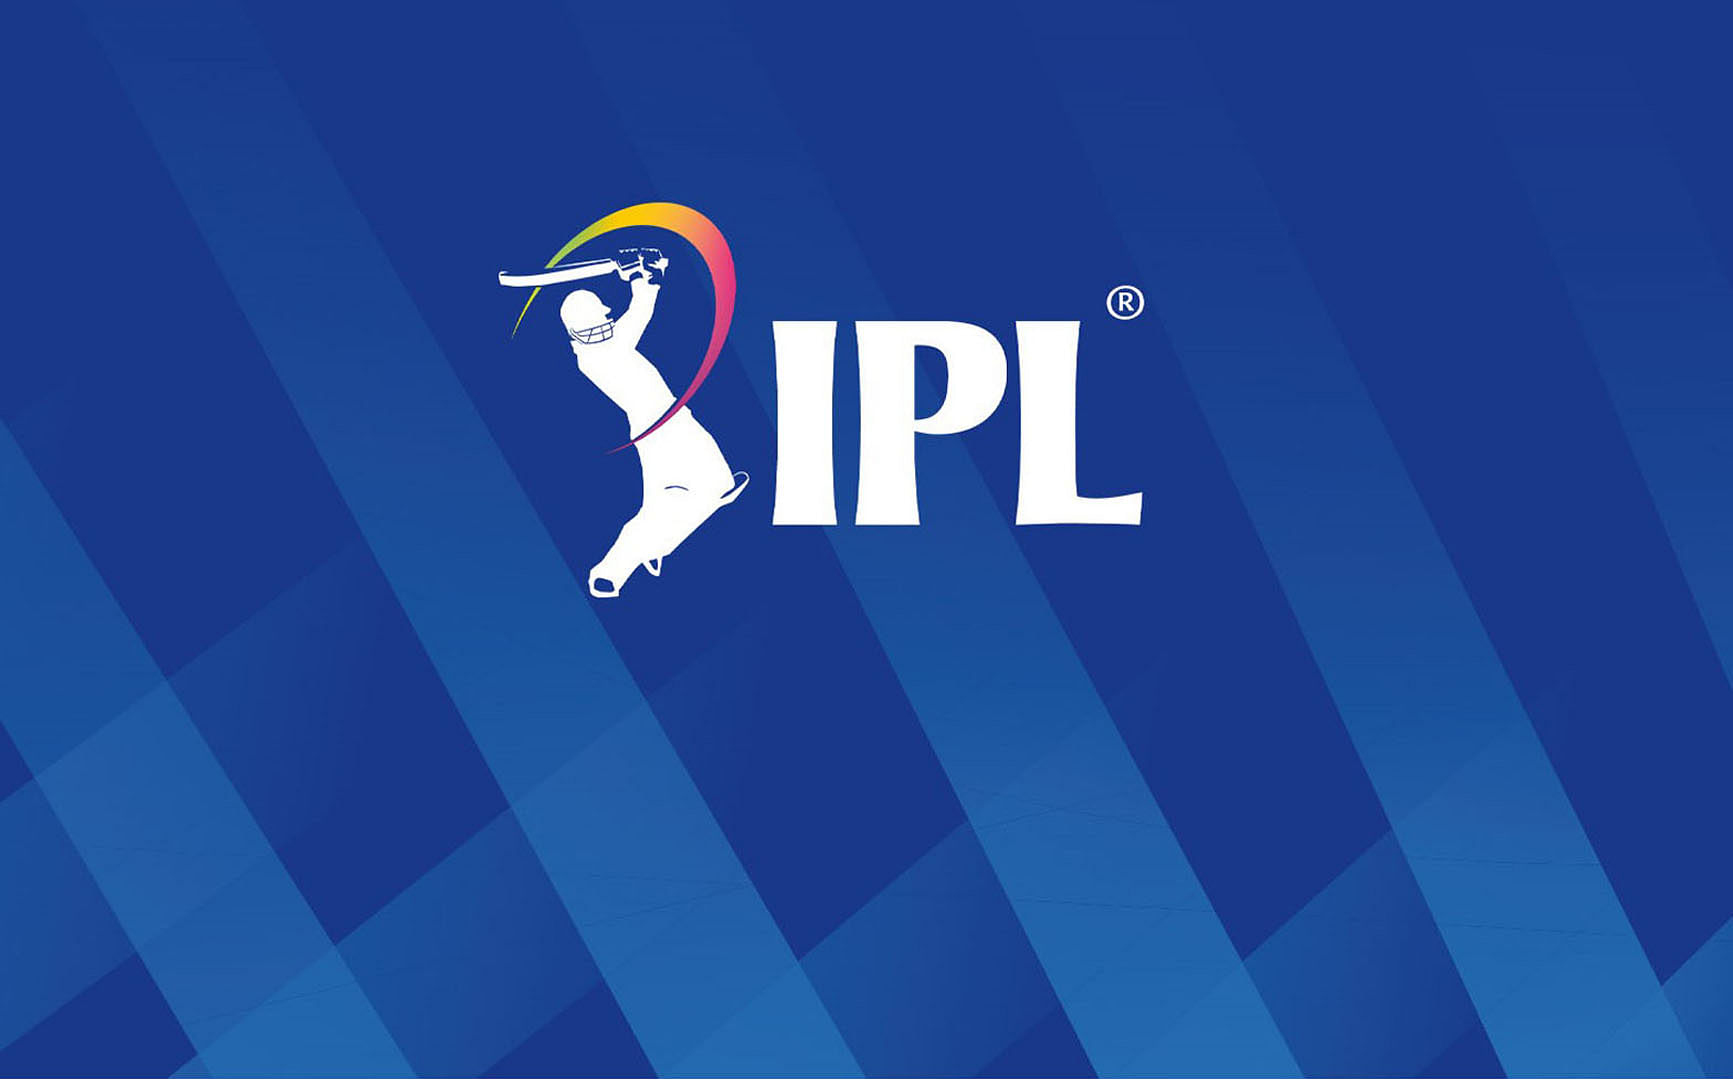 IPL 2023 Live Telecast Free on Star Utsav Movies Watch on DD Free Dish, Airtel Digital, Dish TV, and Others, Full schedule Here